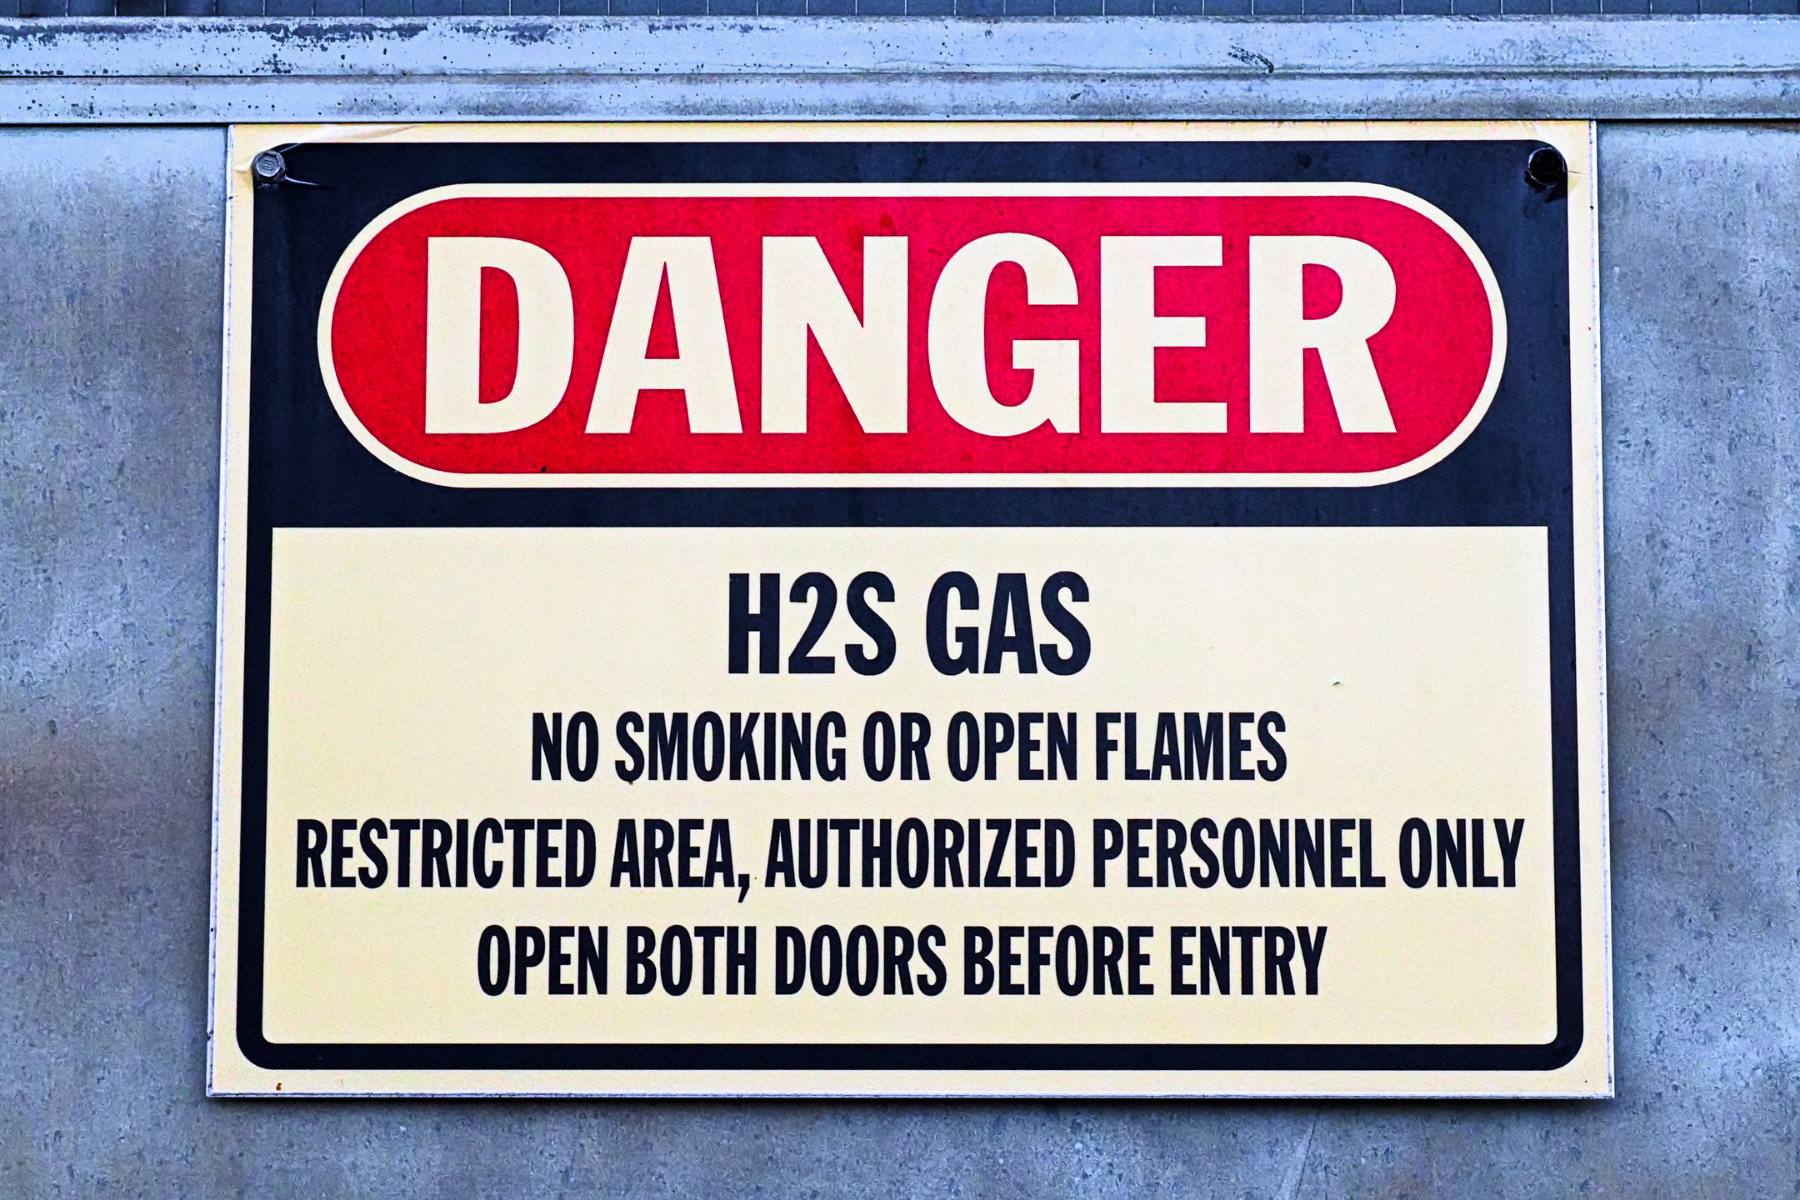 Difference Between H2S Alive and H2S Awareness Explained.